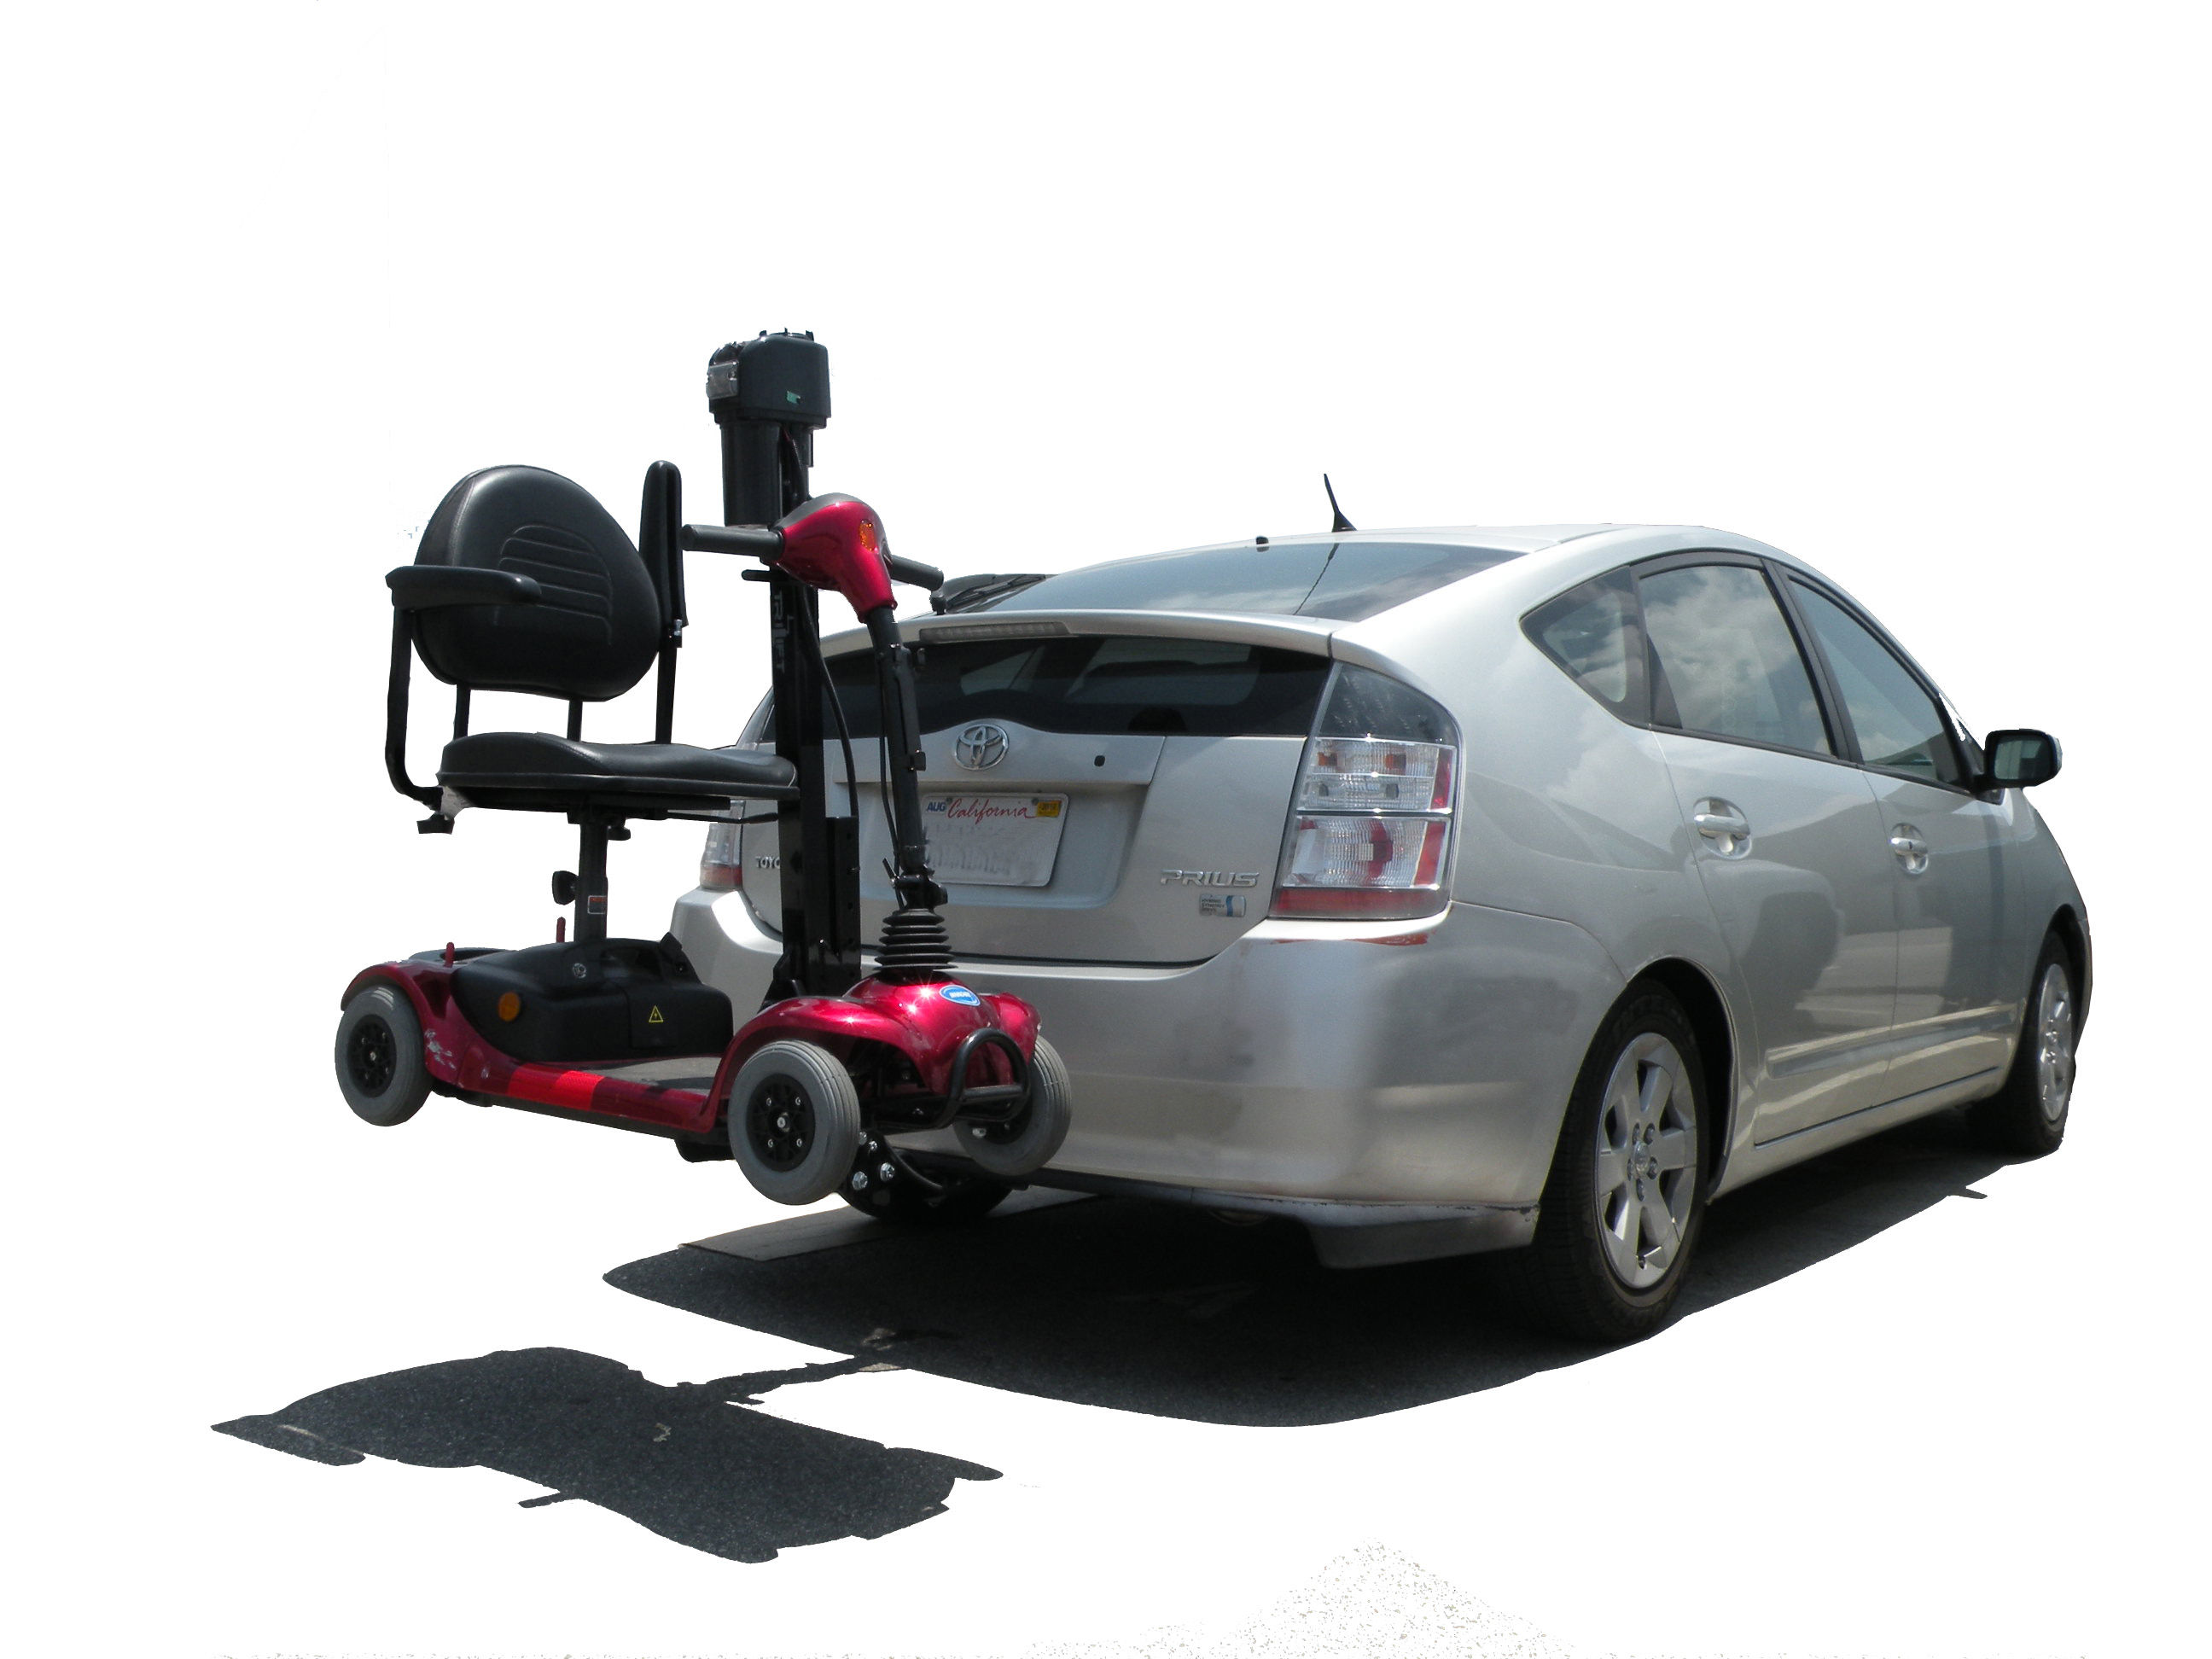 carrier trailer scooter lift Customer Reviews Ratings Consumer Reports hitch